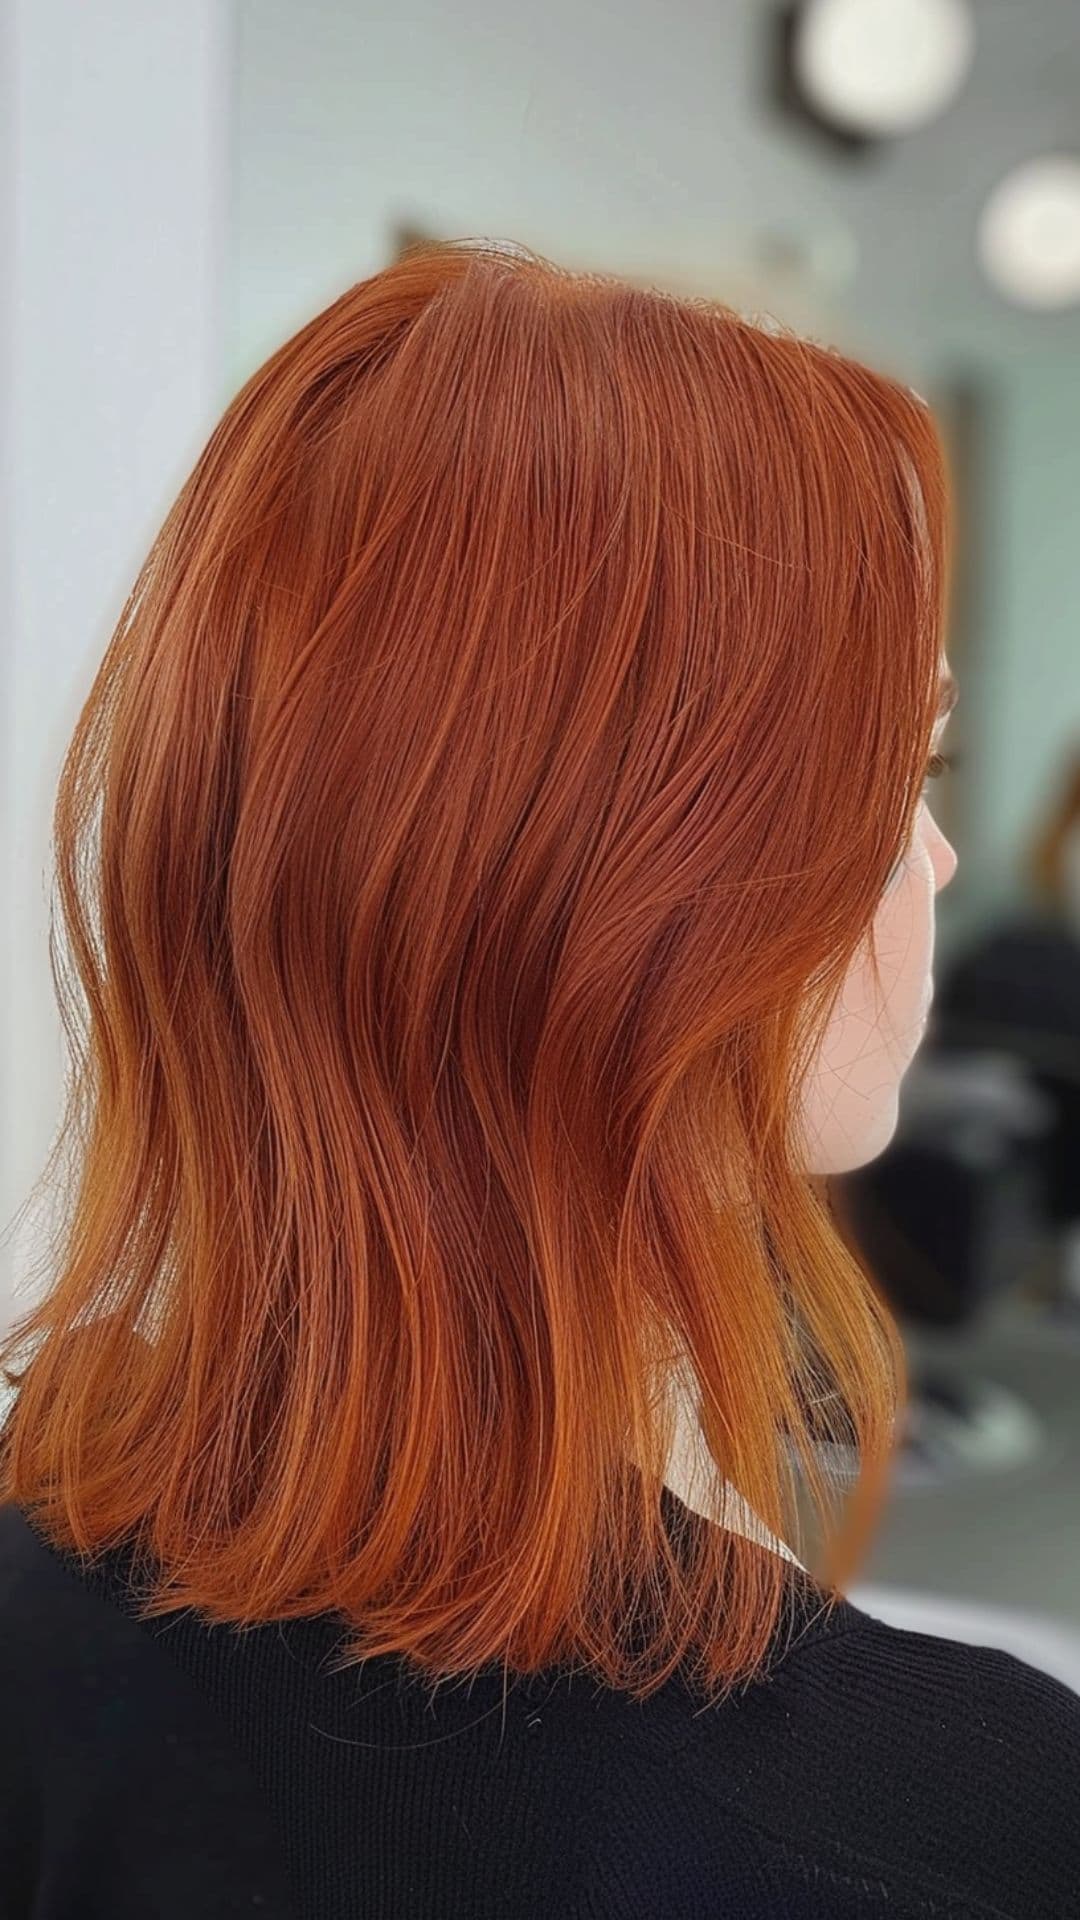 A woman modelling a copper red hair.